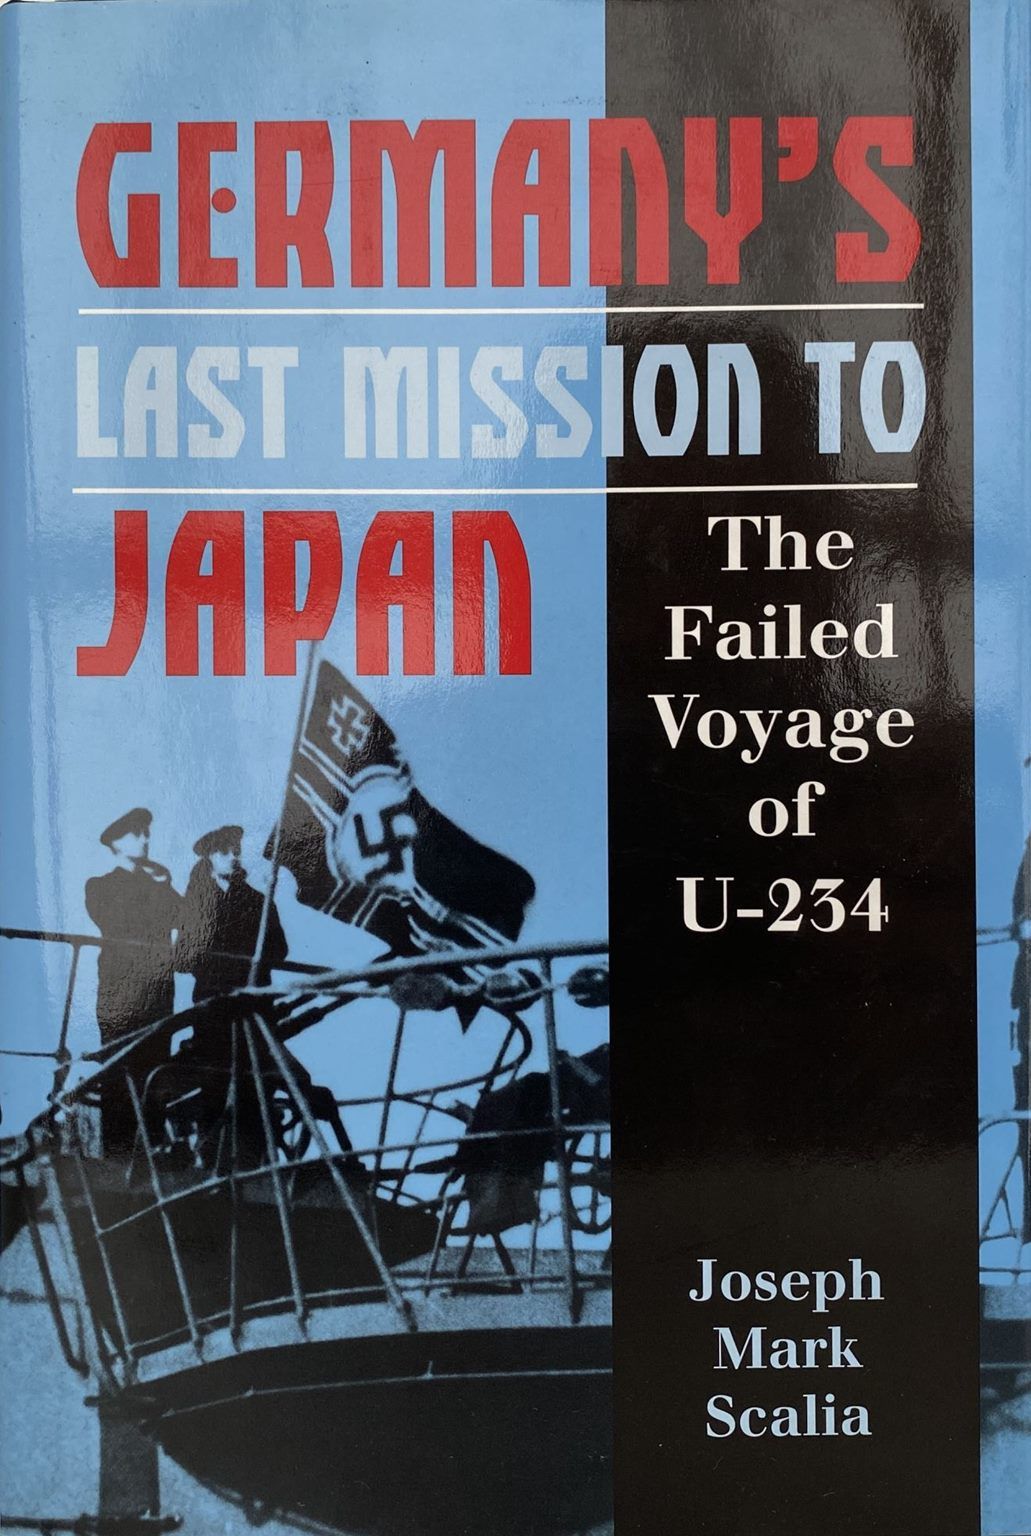 GERMANY'S LAST MISSION TO JAPAN: The Sinister Voyage of U-234